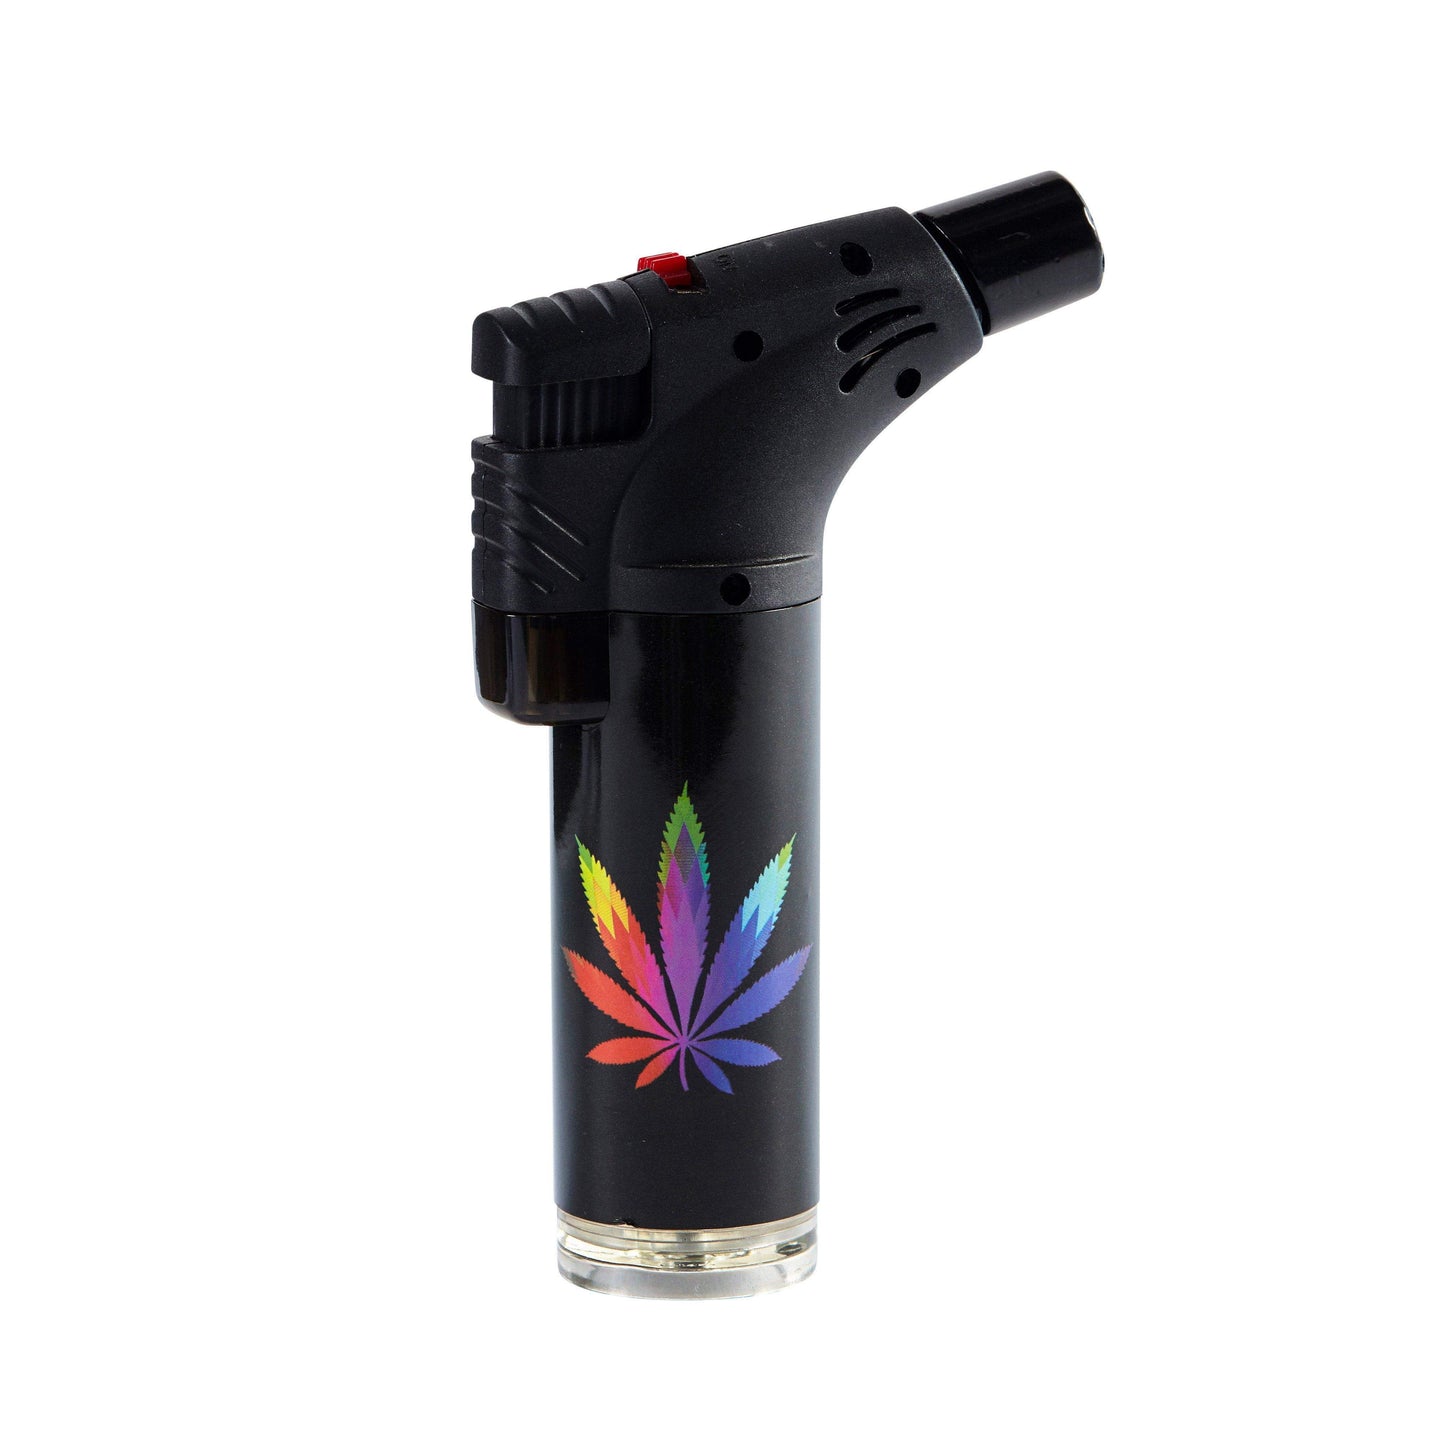 Handy torch lighter smoking device accessory gun-shaped look for easy handling in weed life design geo colors